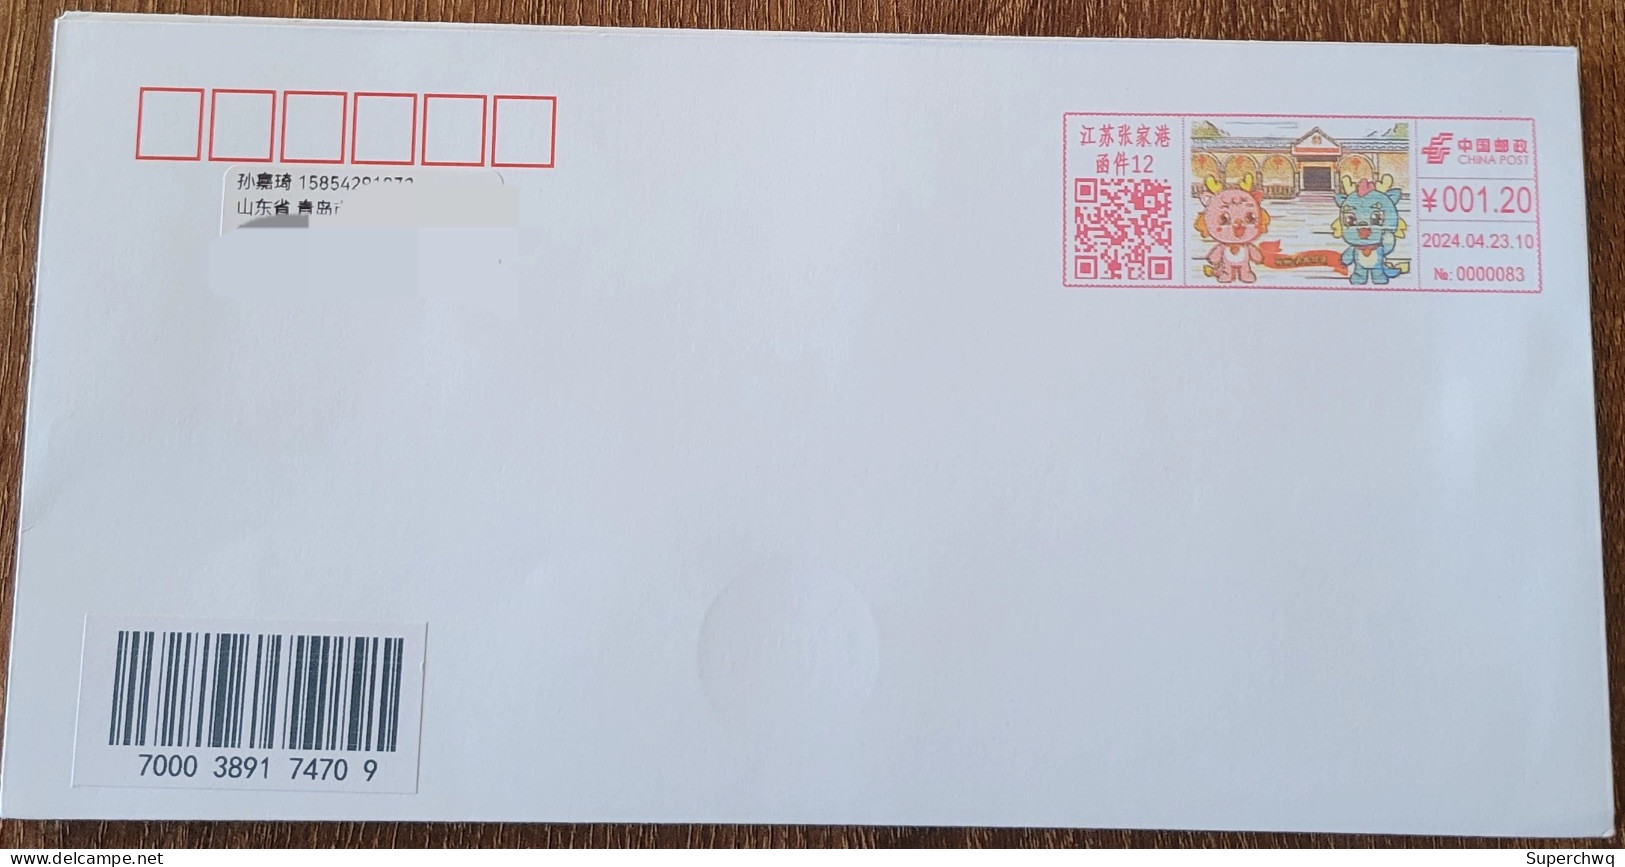 China Cover "Qinglong Community" (Zhangjiagang, Jiangsu) Colored Postage Machine Stamp First Day Actual Delivery Seal - Buste